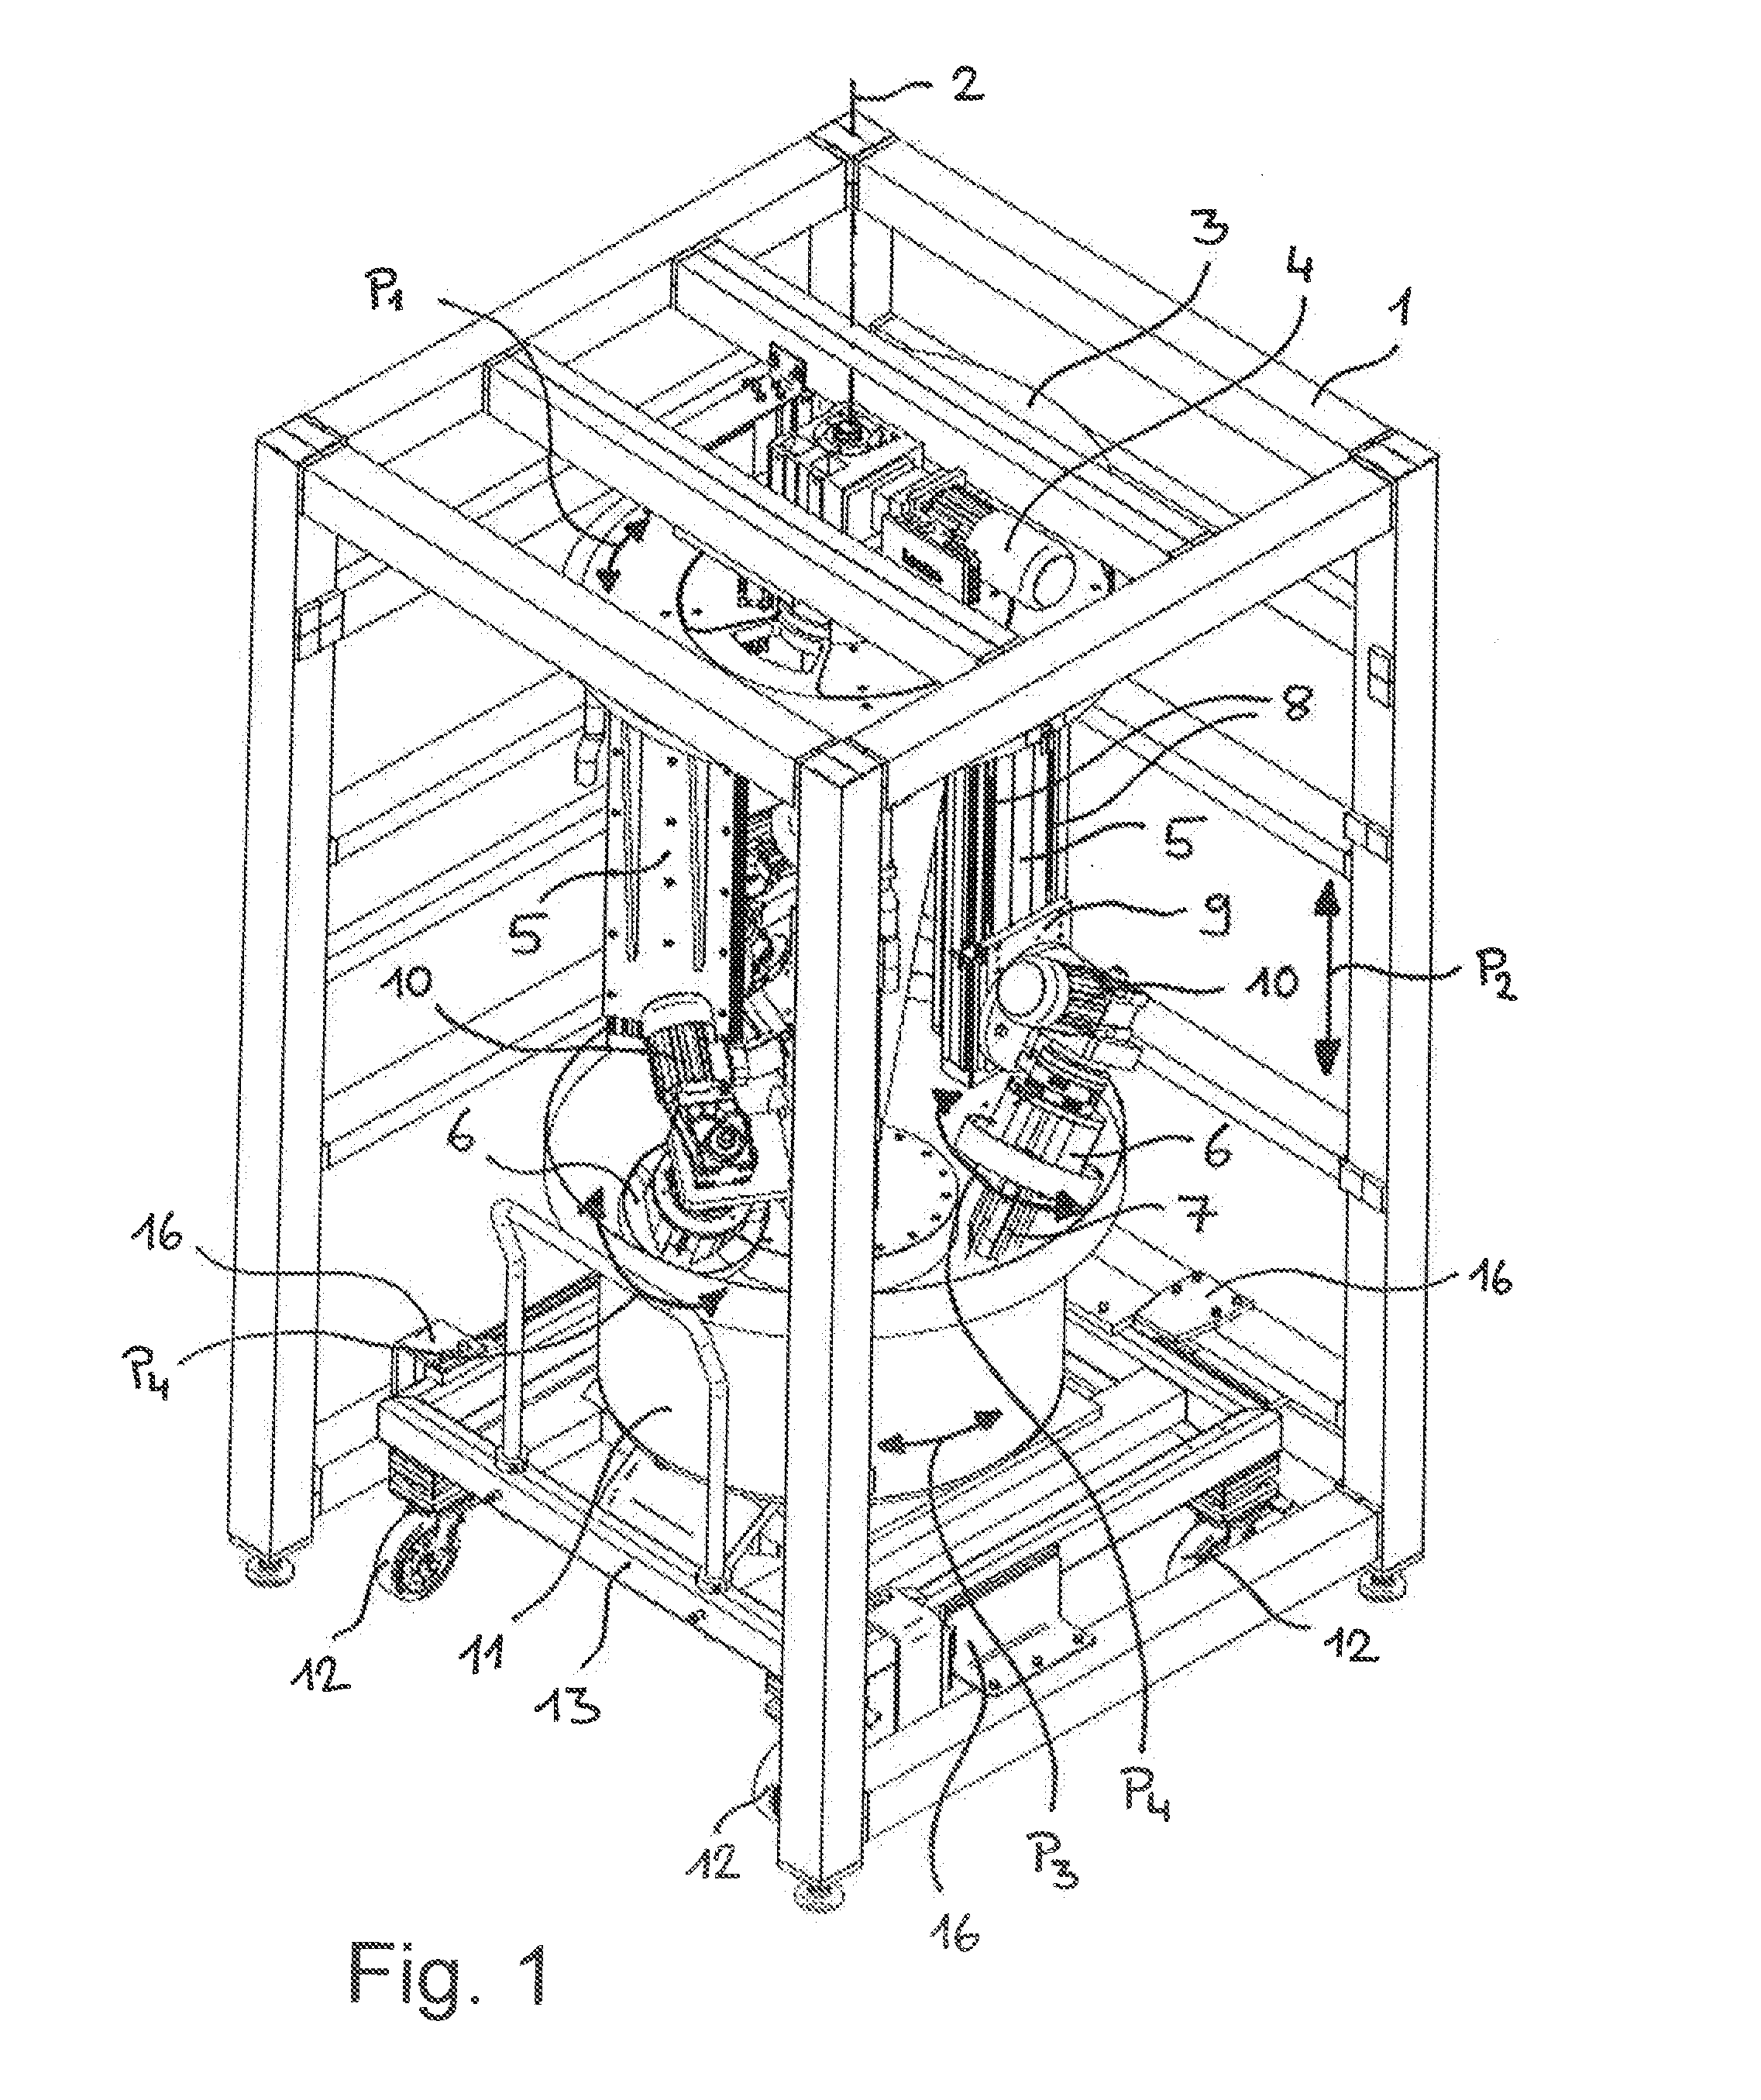 Method and device for the surface finishing of workpieces